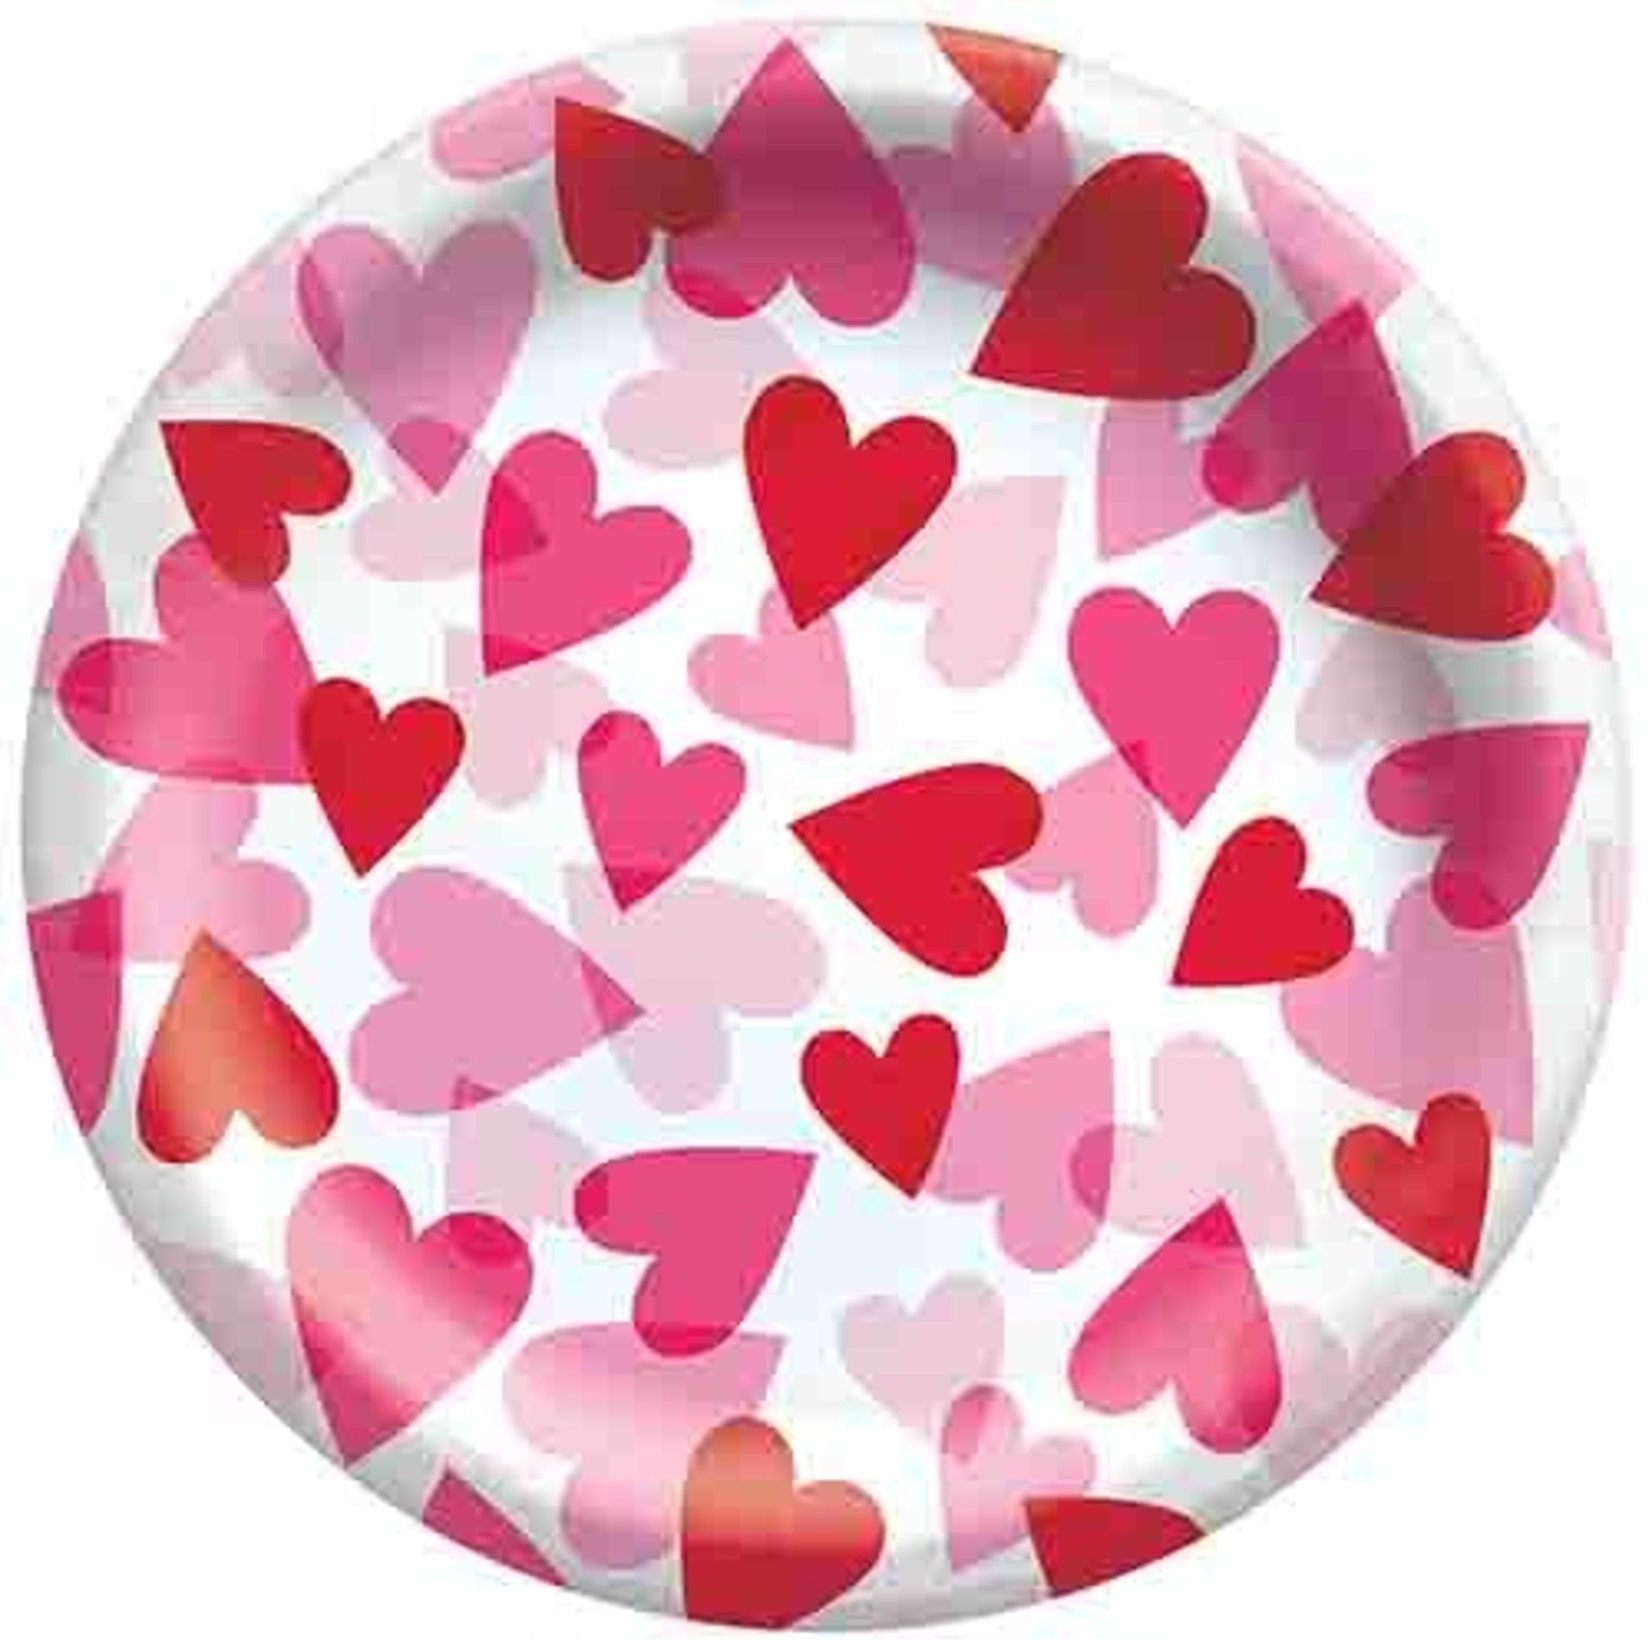 Amscan 9" Heart Party Plates - 20ct.